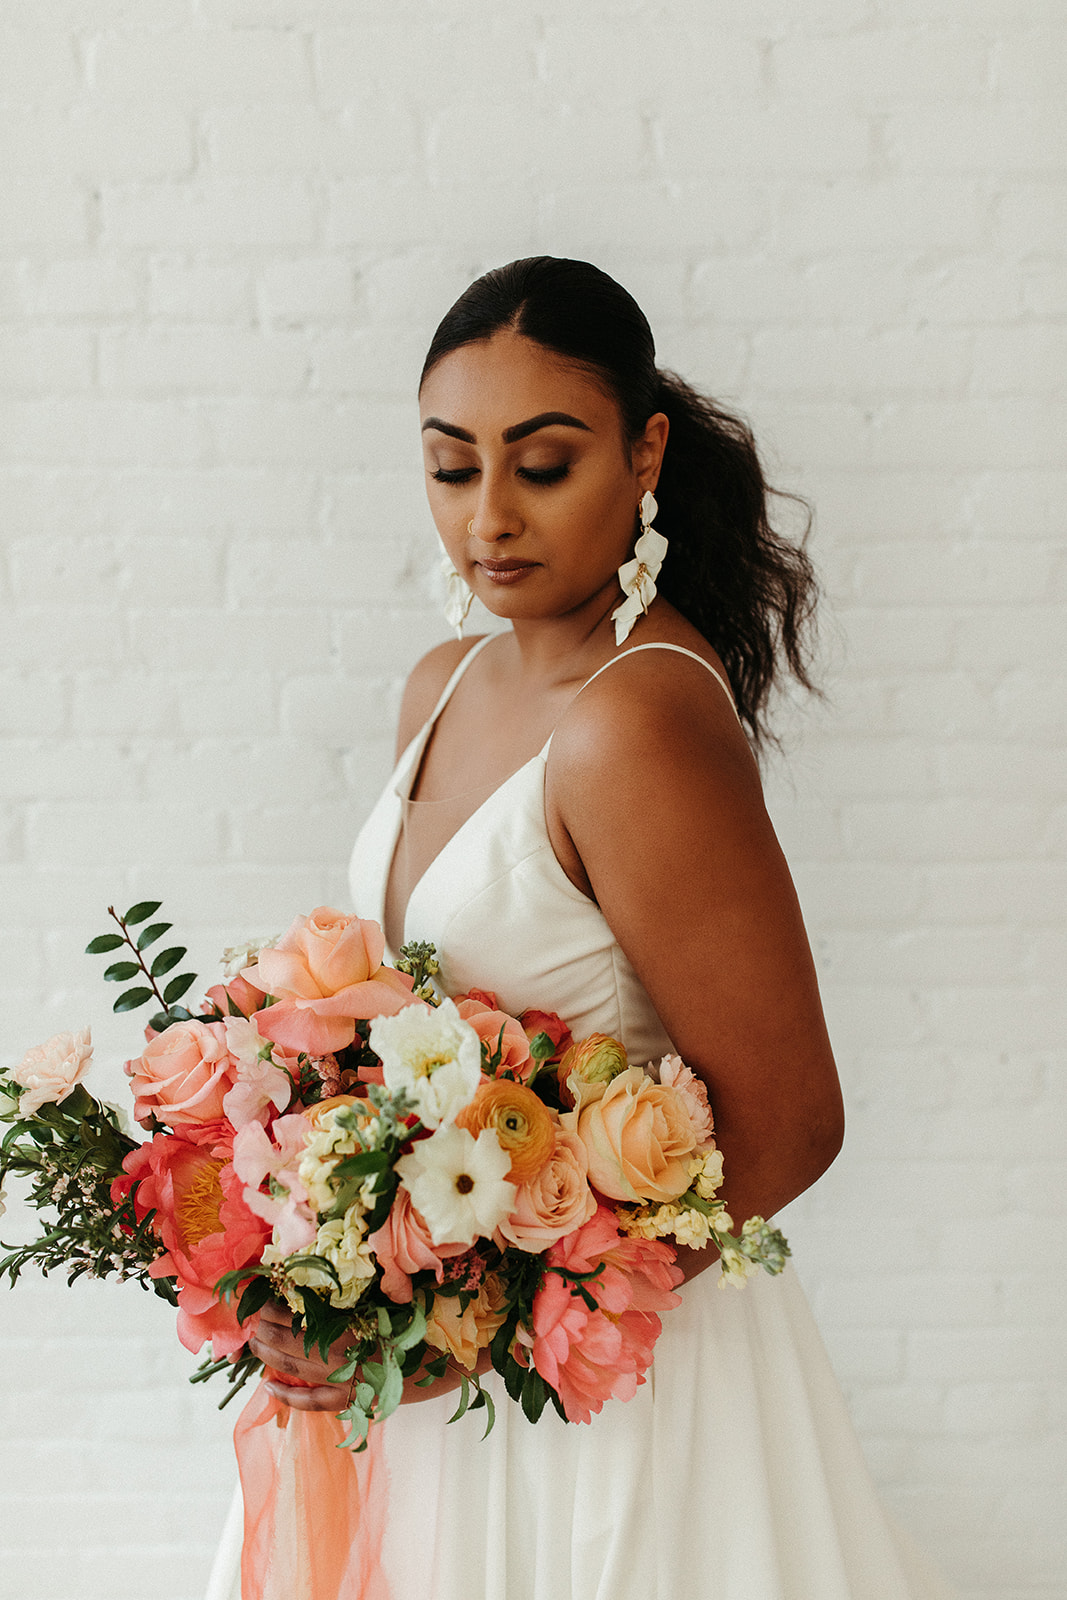 Sleek hair styling for the boho bride with bold citrus floral bouquet